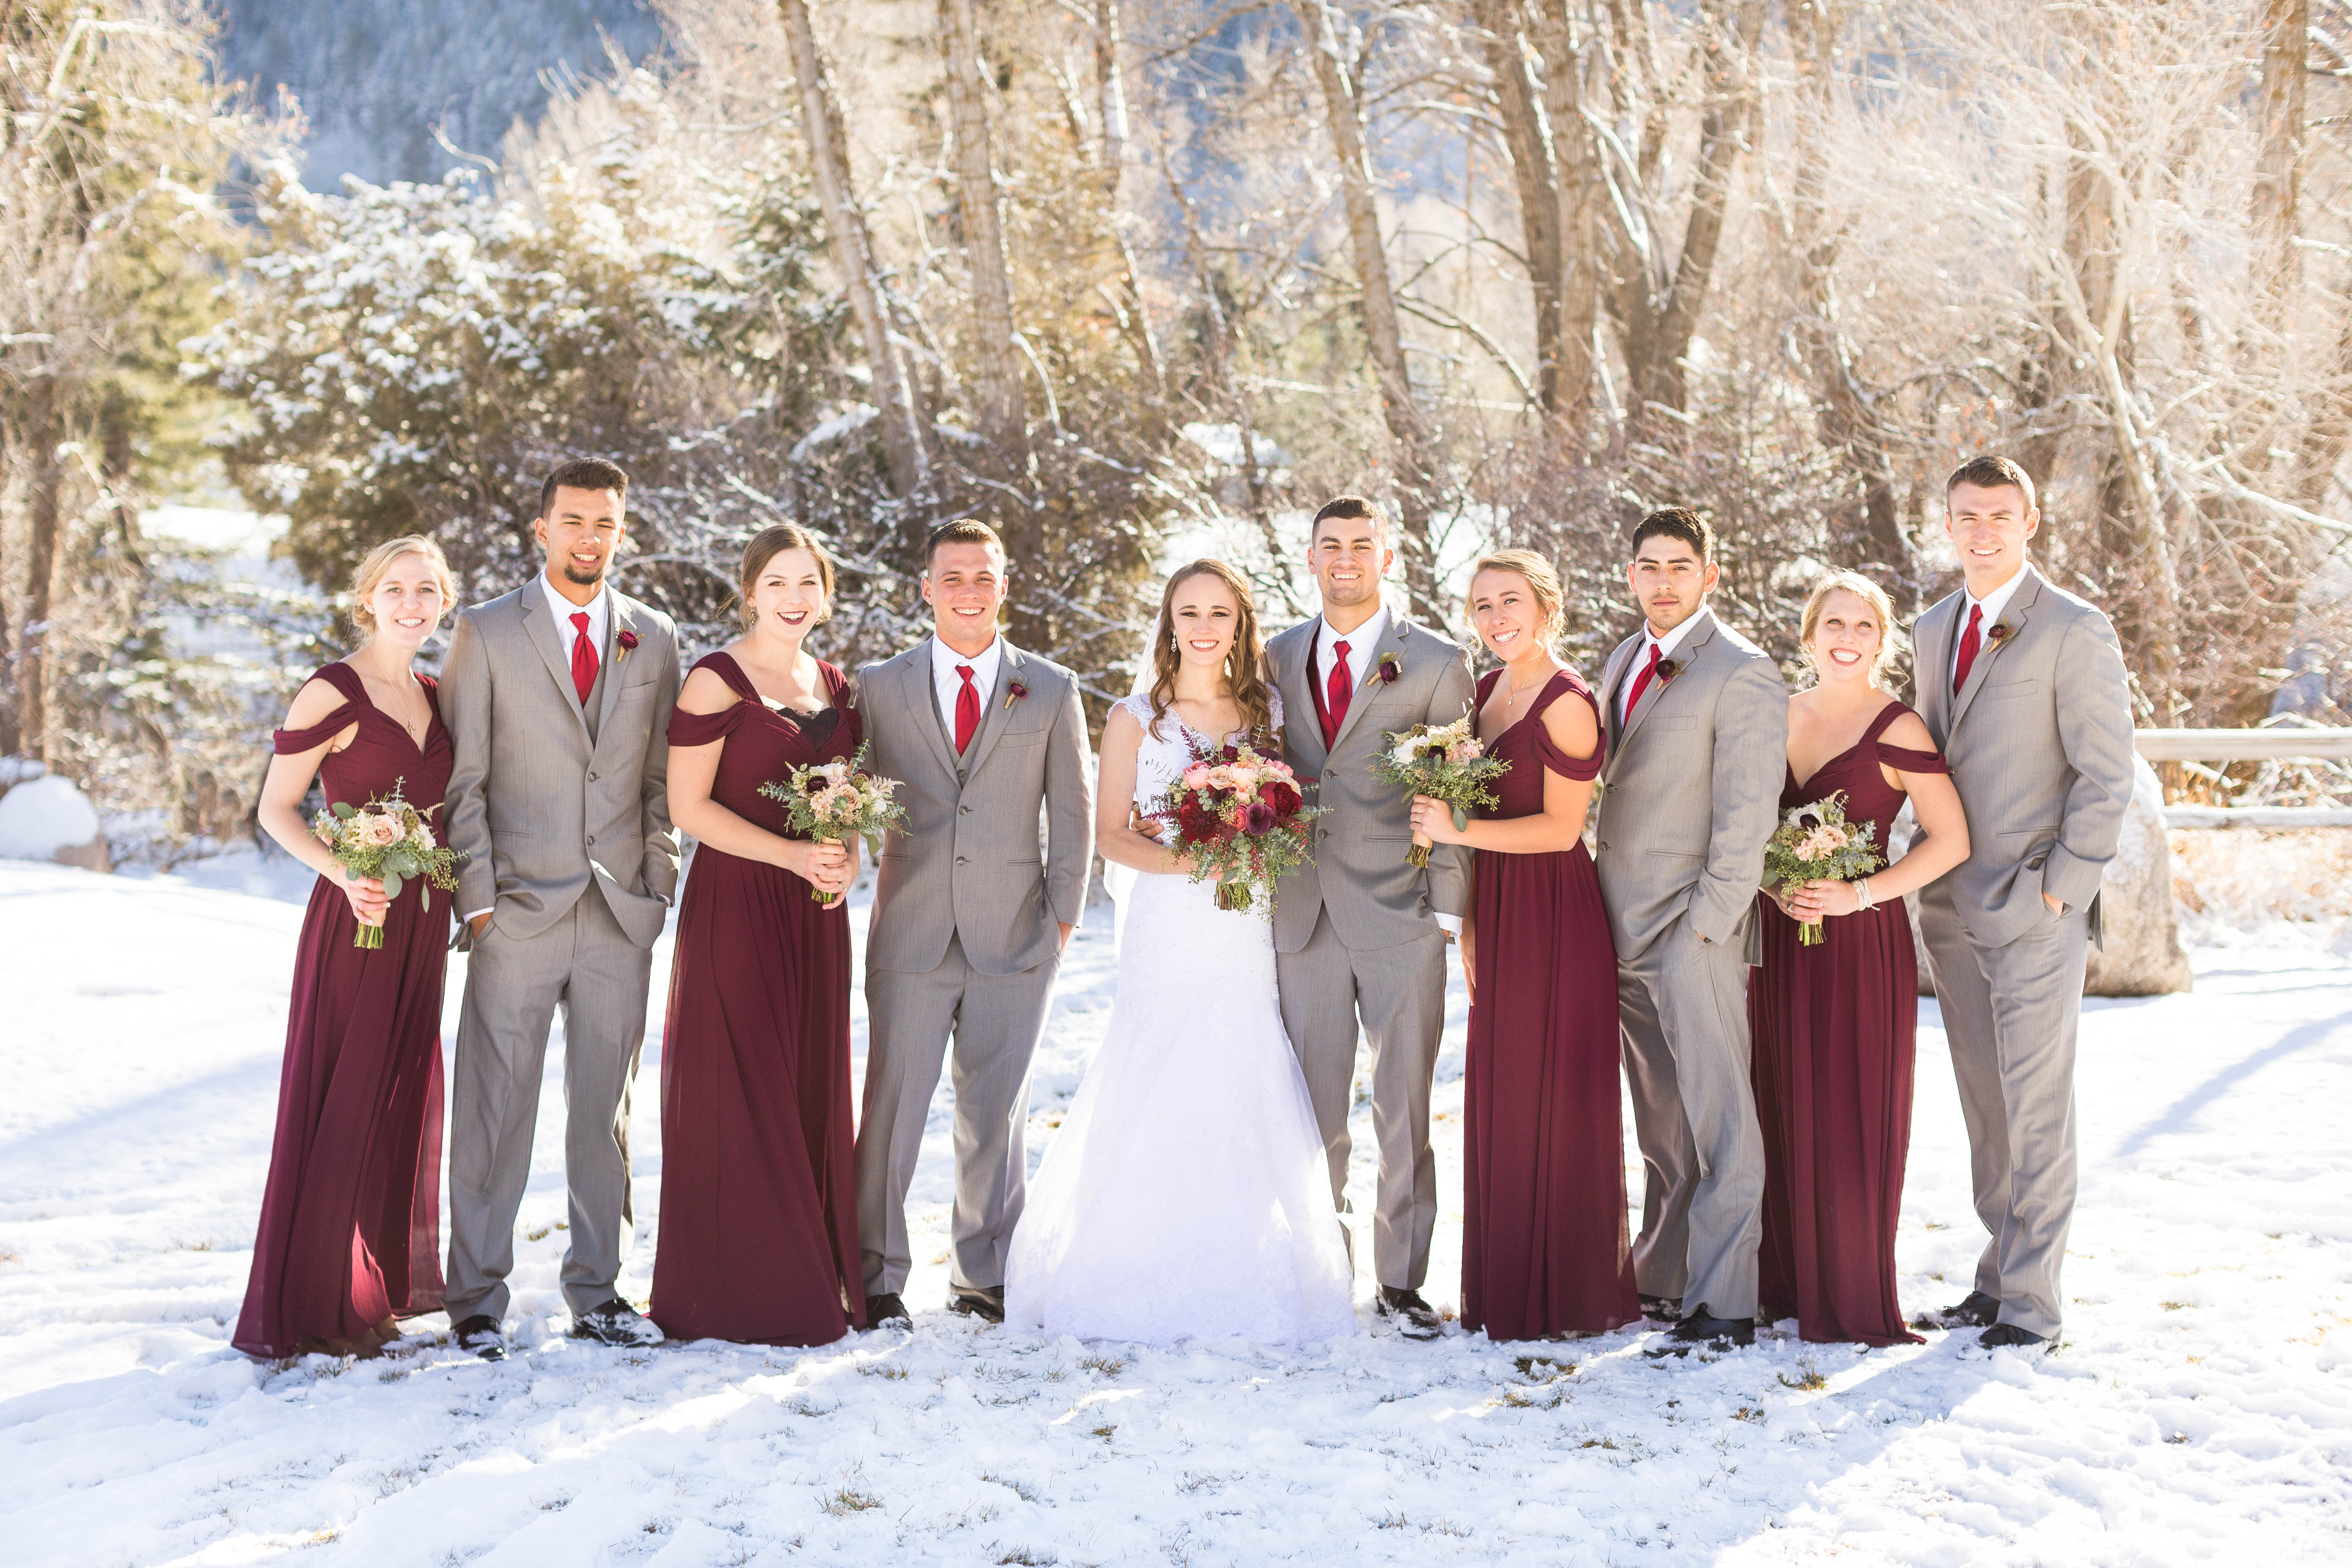 wedding party in burgundy dresses and grey suits gather around couple